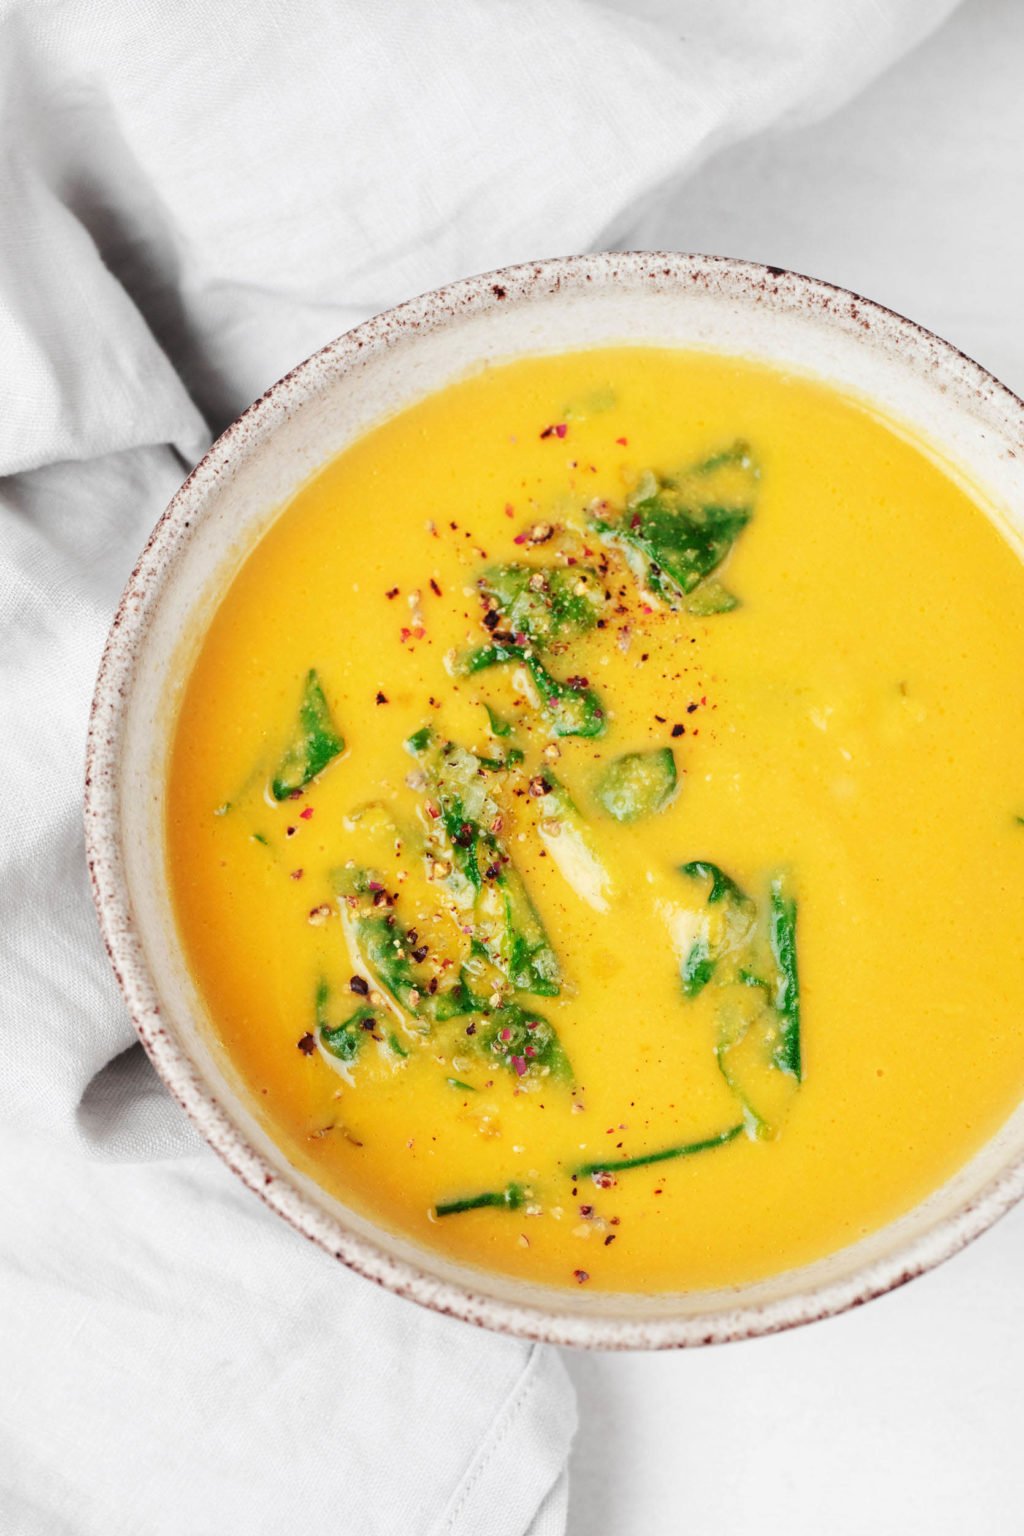 A bowl of pureed chickpea soup has been topped with wilted greens and pepper flakes. It rests on a white surface with a gray napkin nearby.